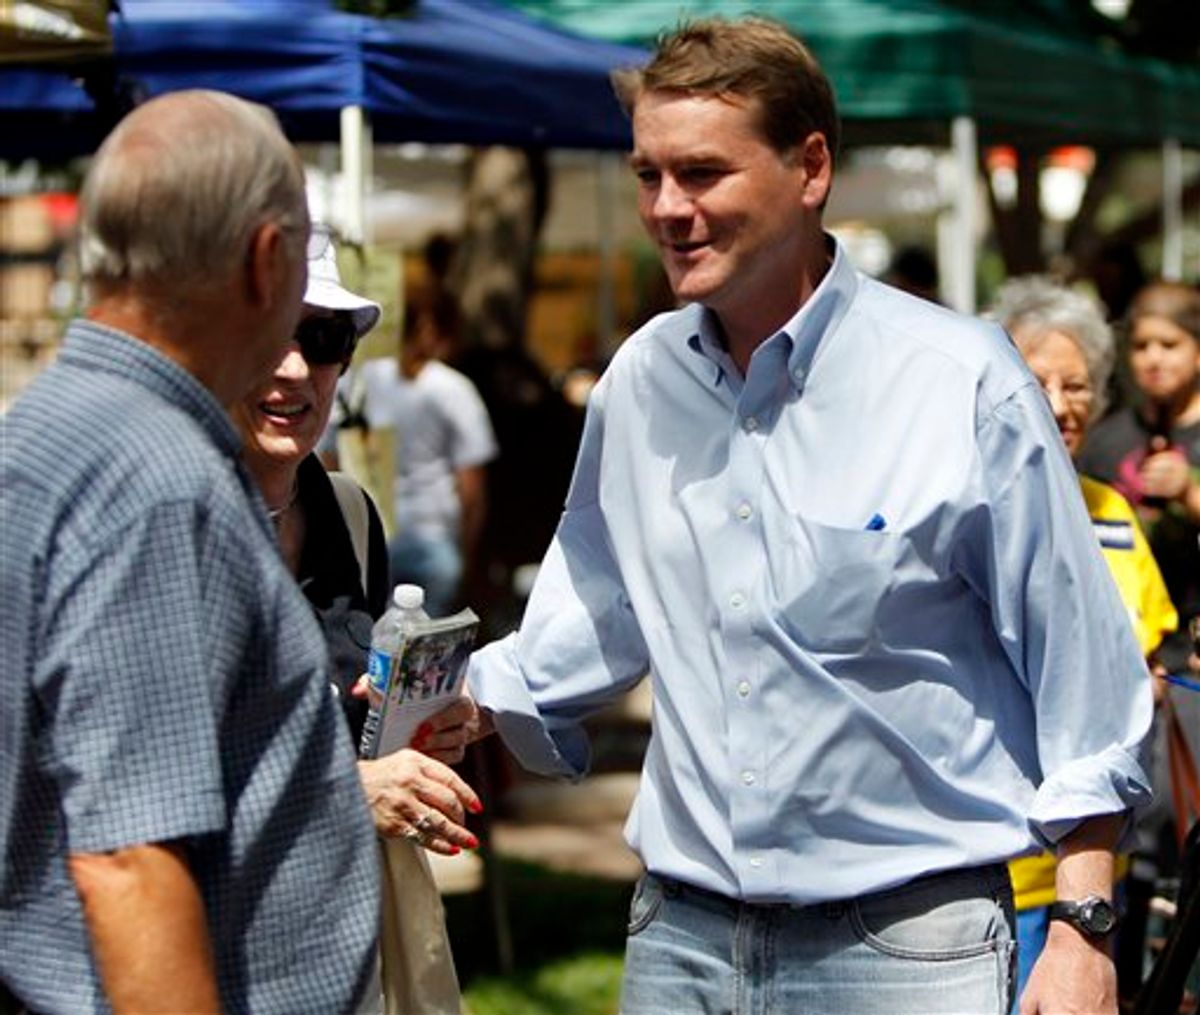 U.S. Senator Michael Bennet, right, D-Colo., campaigns in downtown Colorado Springs, Colo., on Monday, Aug. 9, 2010. Bennet is being challenged by former House Speaker Andrew Romanoff for his seat in the U.S. Senate in Tuesday's primary election. (AP Photo/Ed Andrieski) (AP)